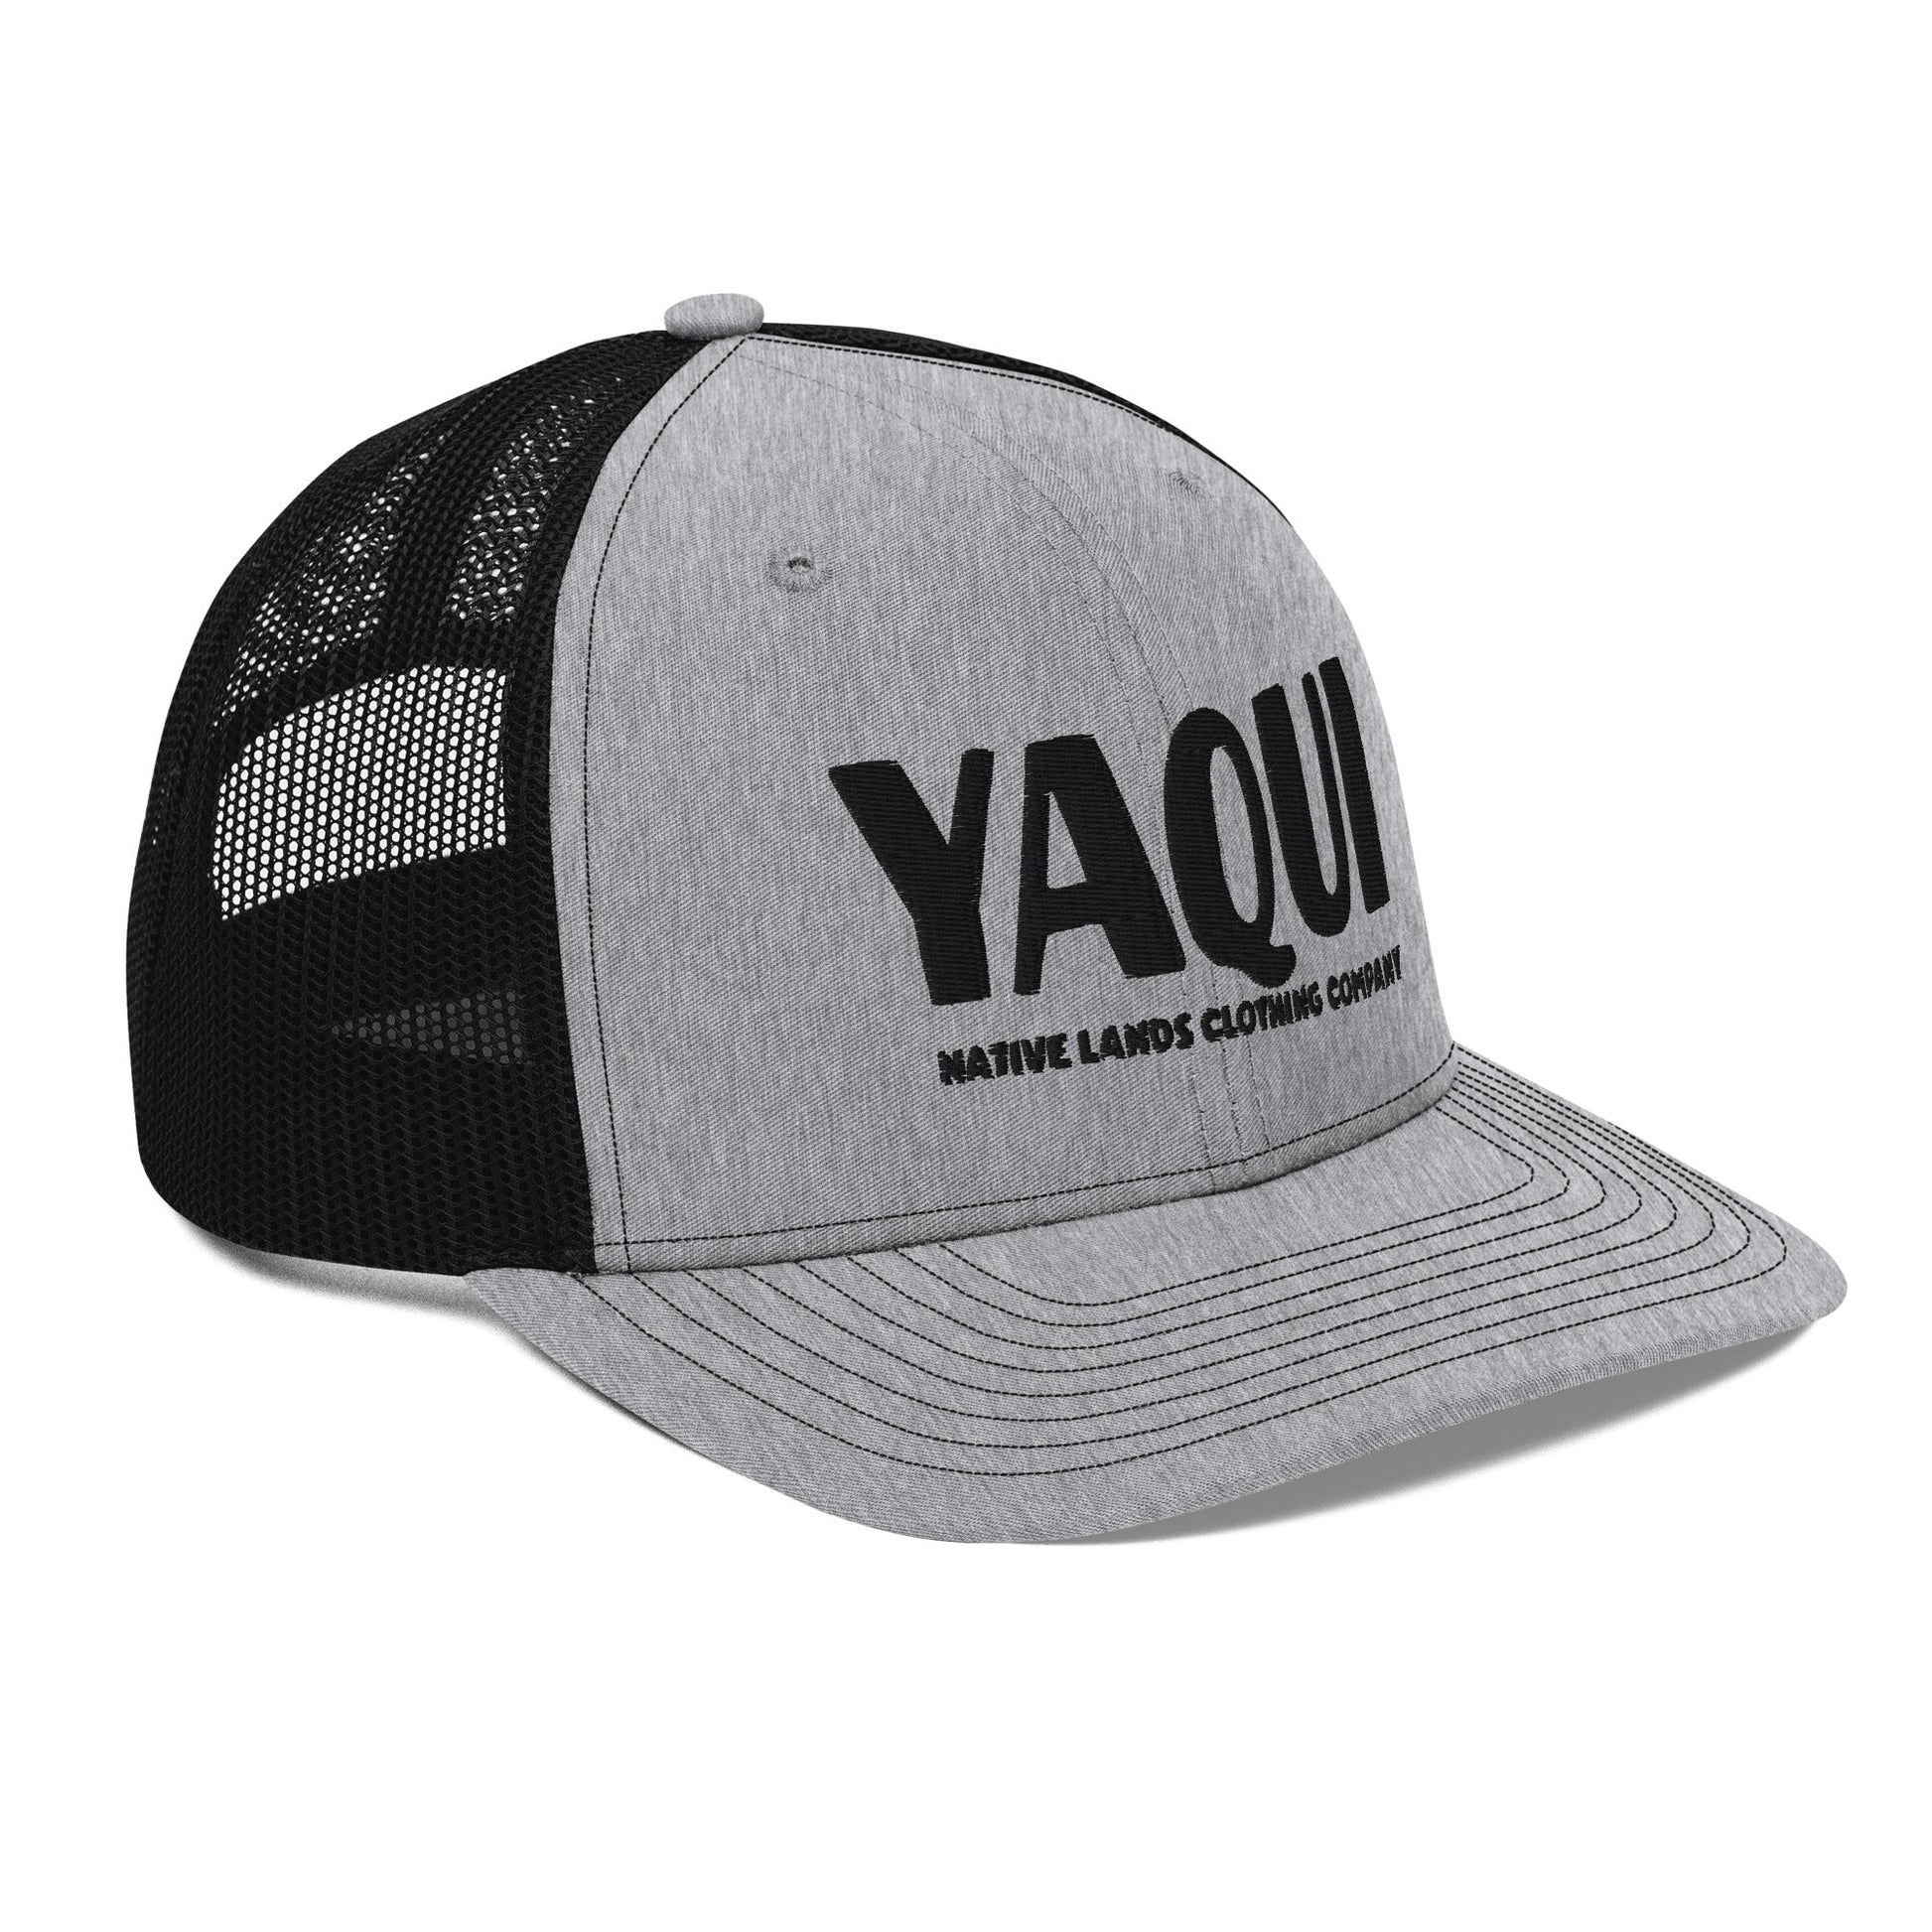 Yaqui Tribe Trucker Cap Embroidered Native American Native Lands Clothing Company LLC